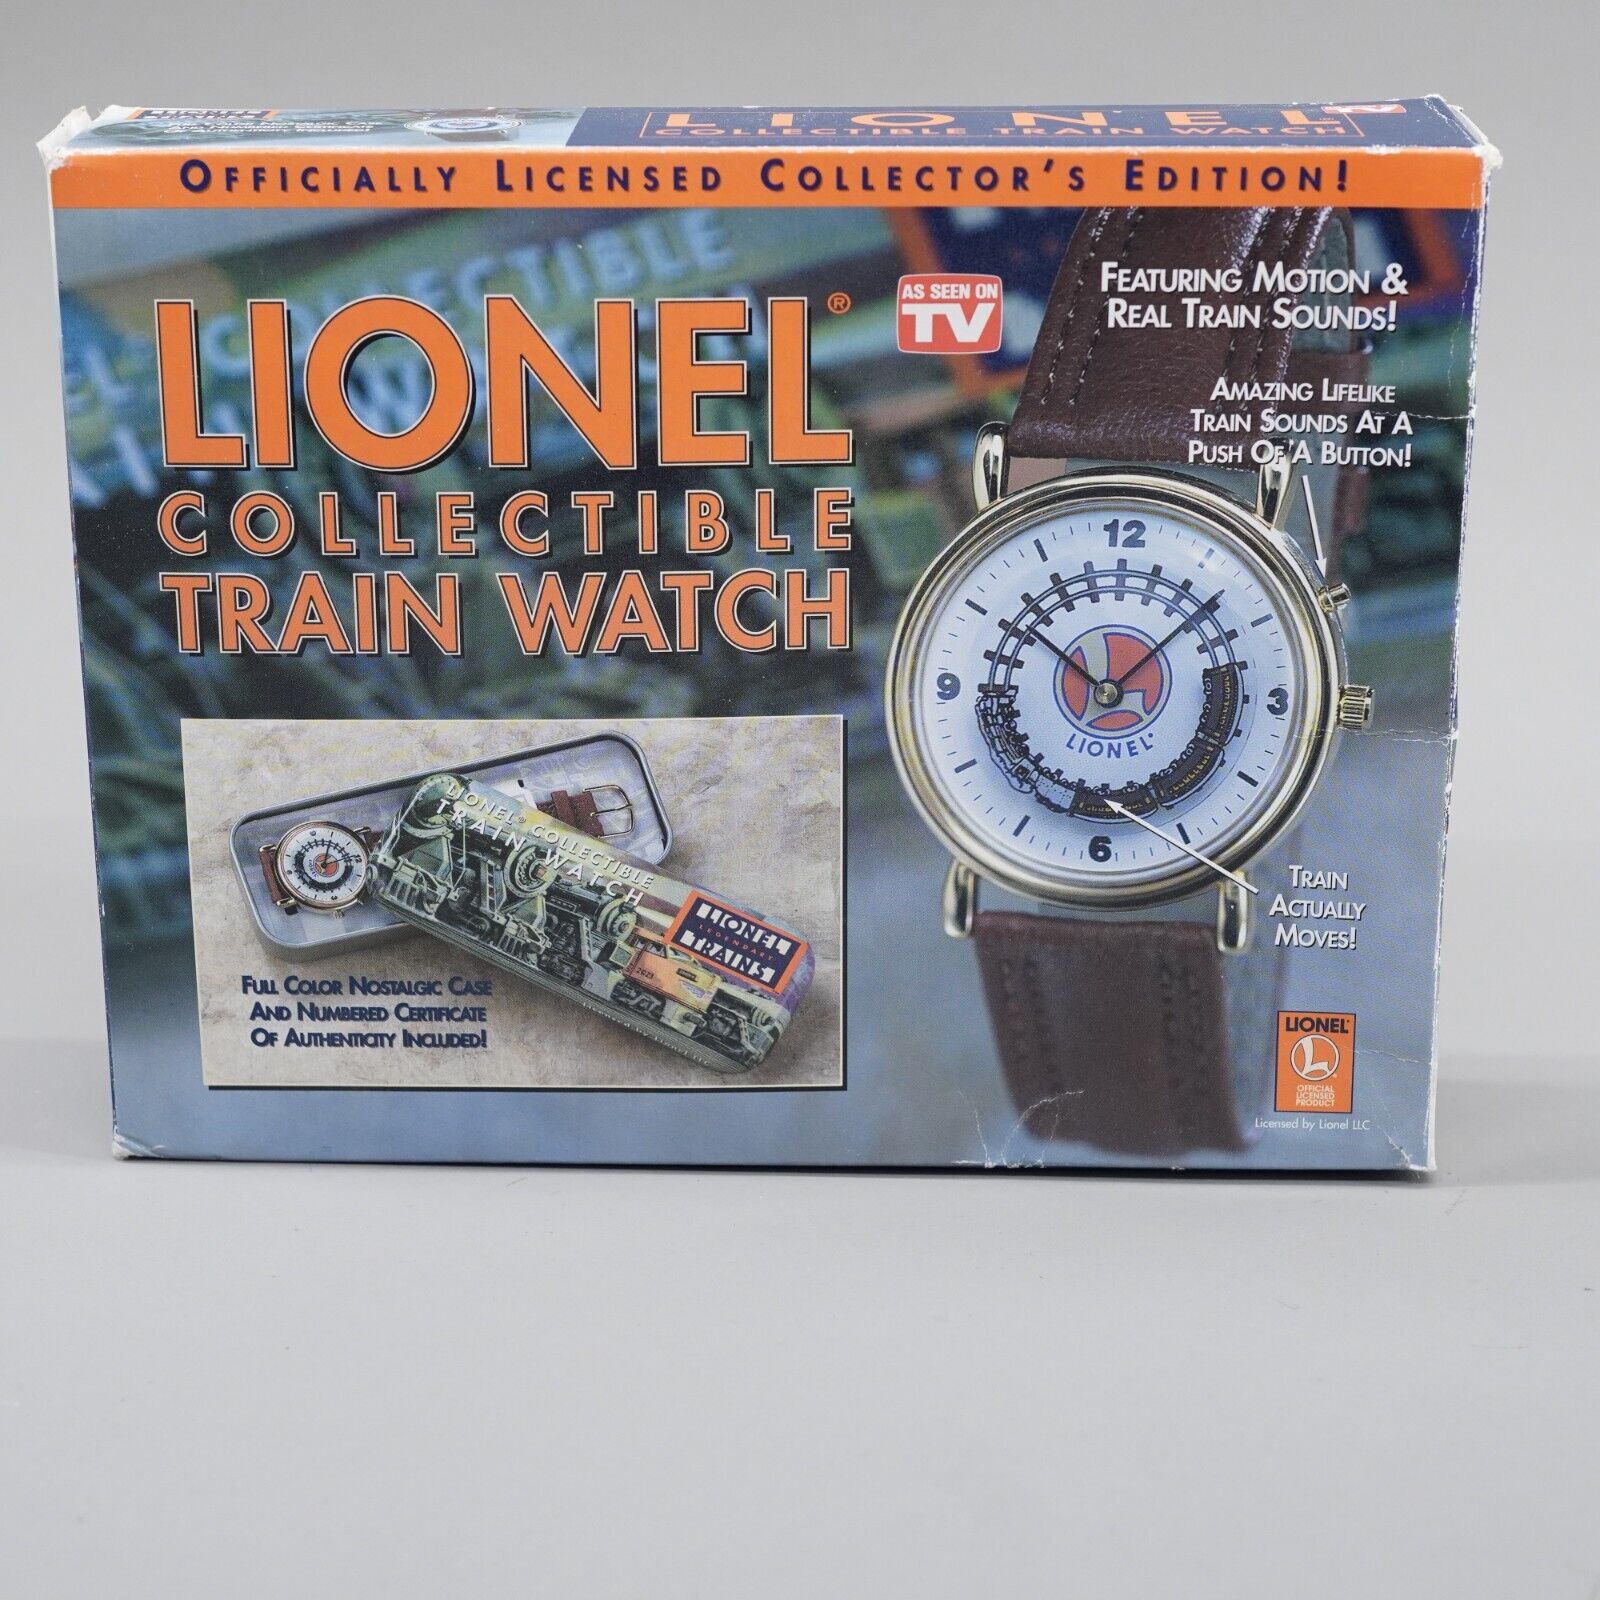 Lionel Collectible Train Watch With Sounds  & Moving Train New Original Box